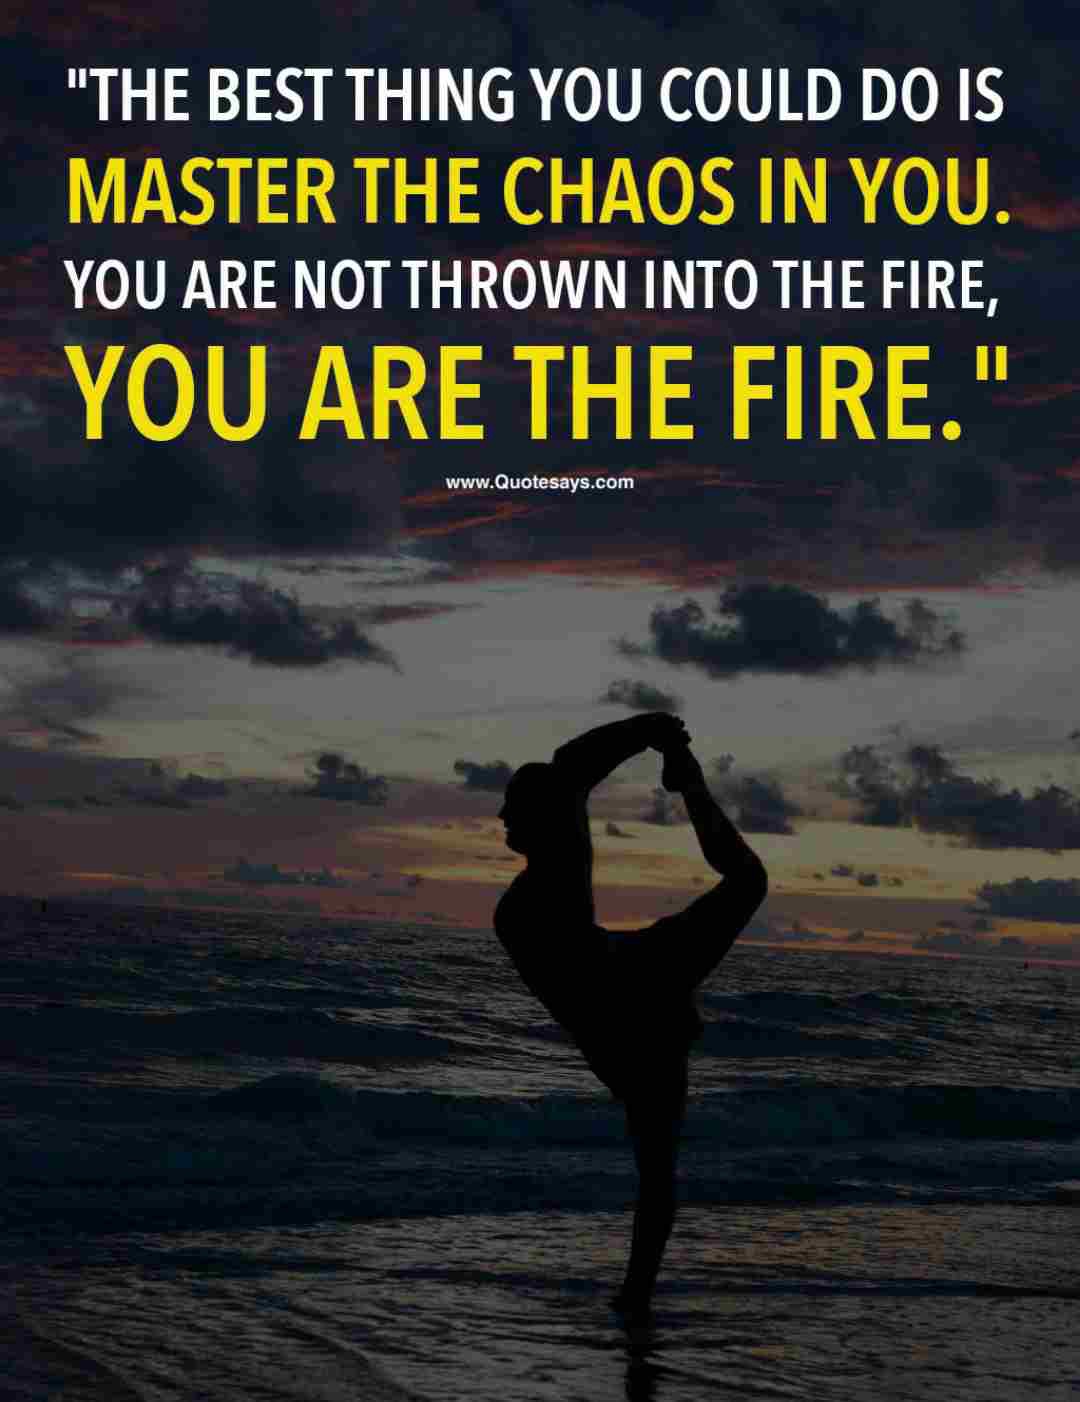 the best thing you could do is master the chaos in you. you are not thrown into the fire, you are the fire